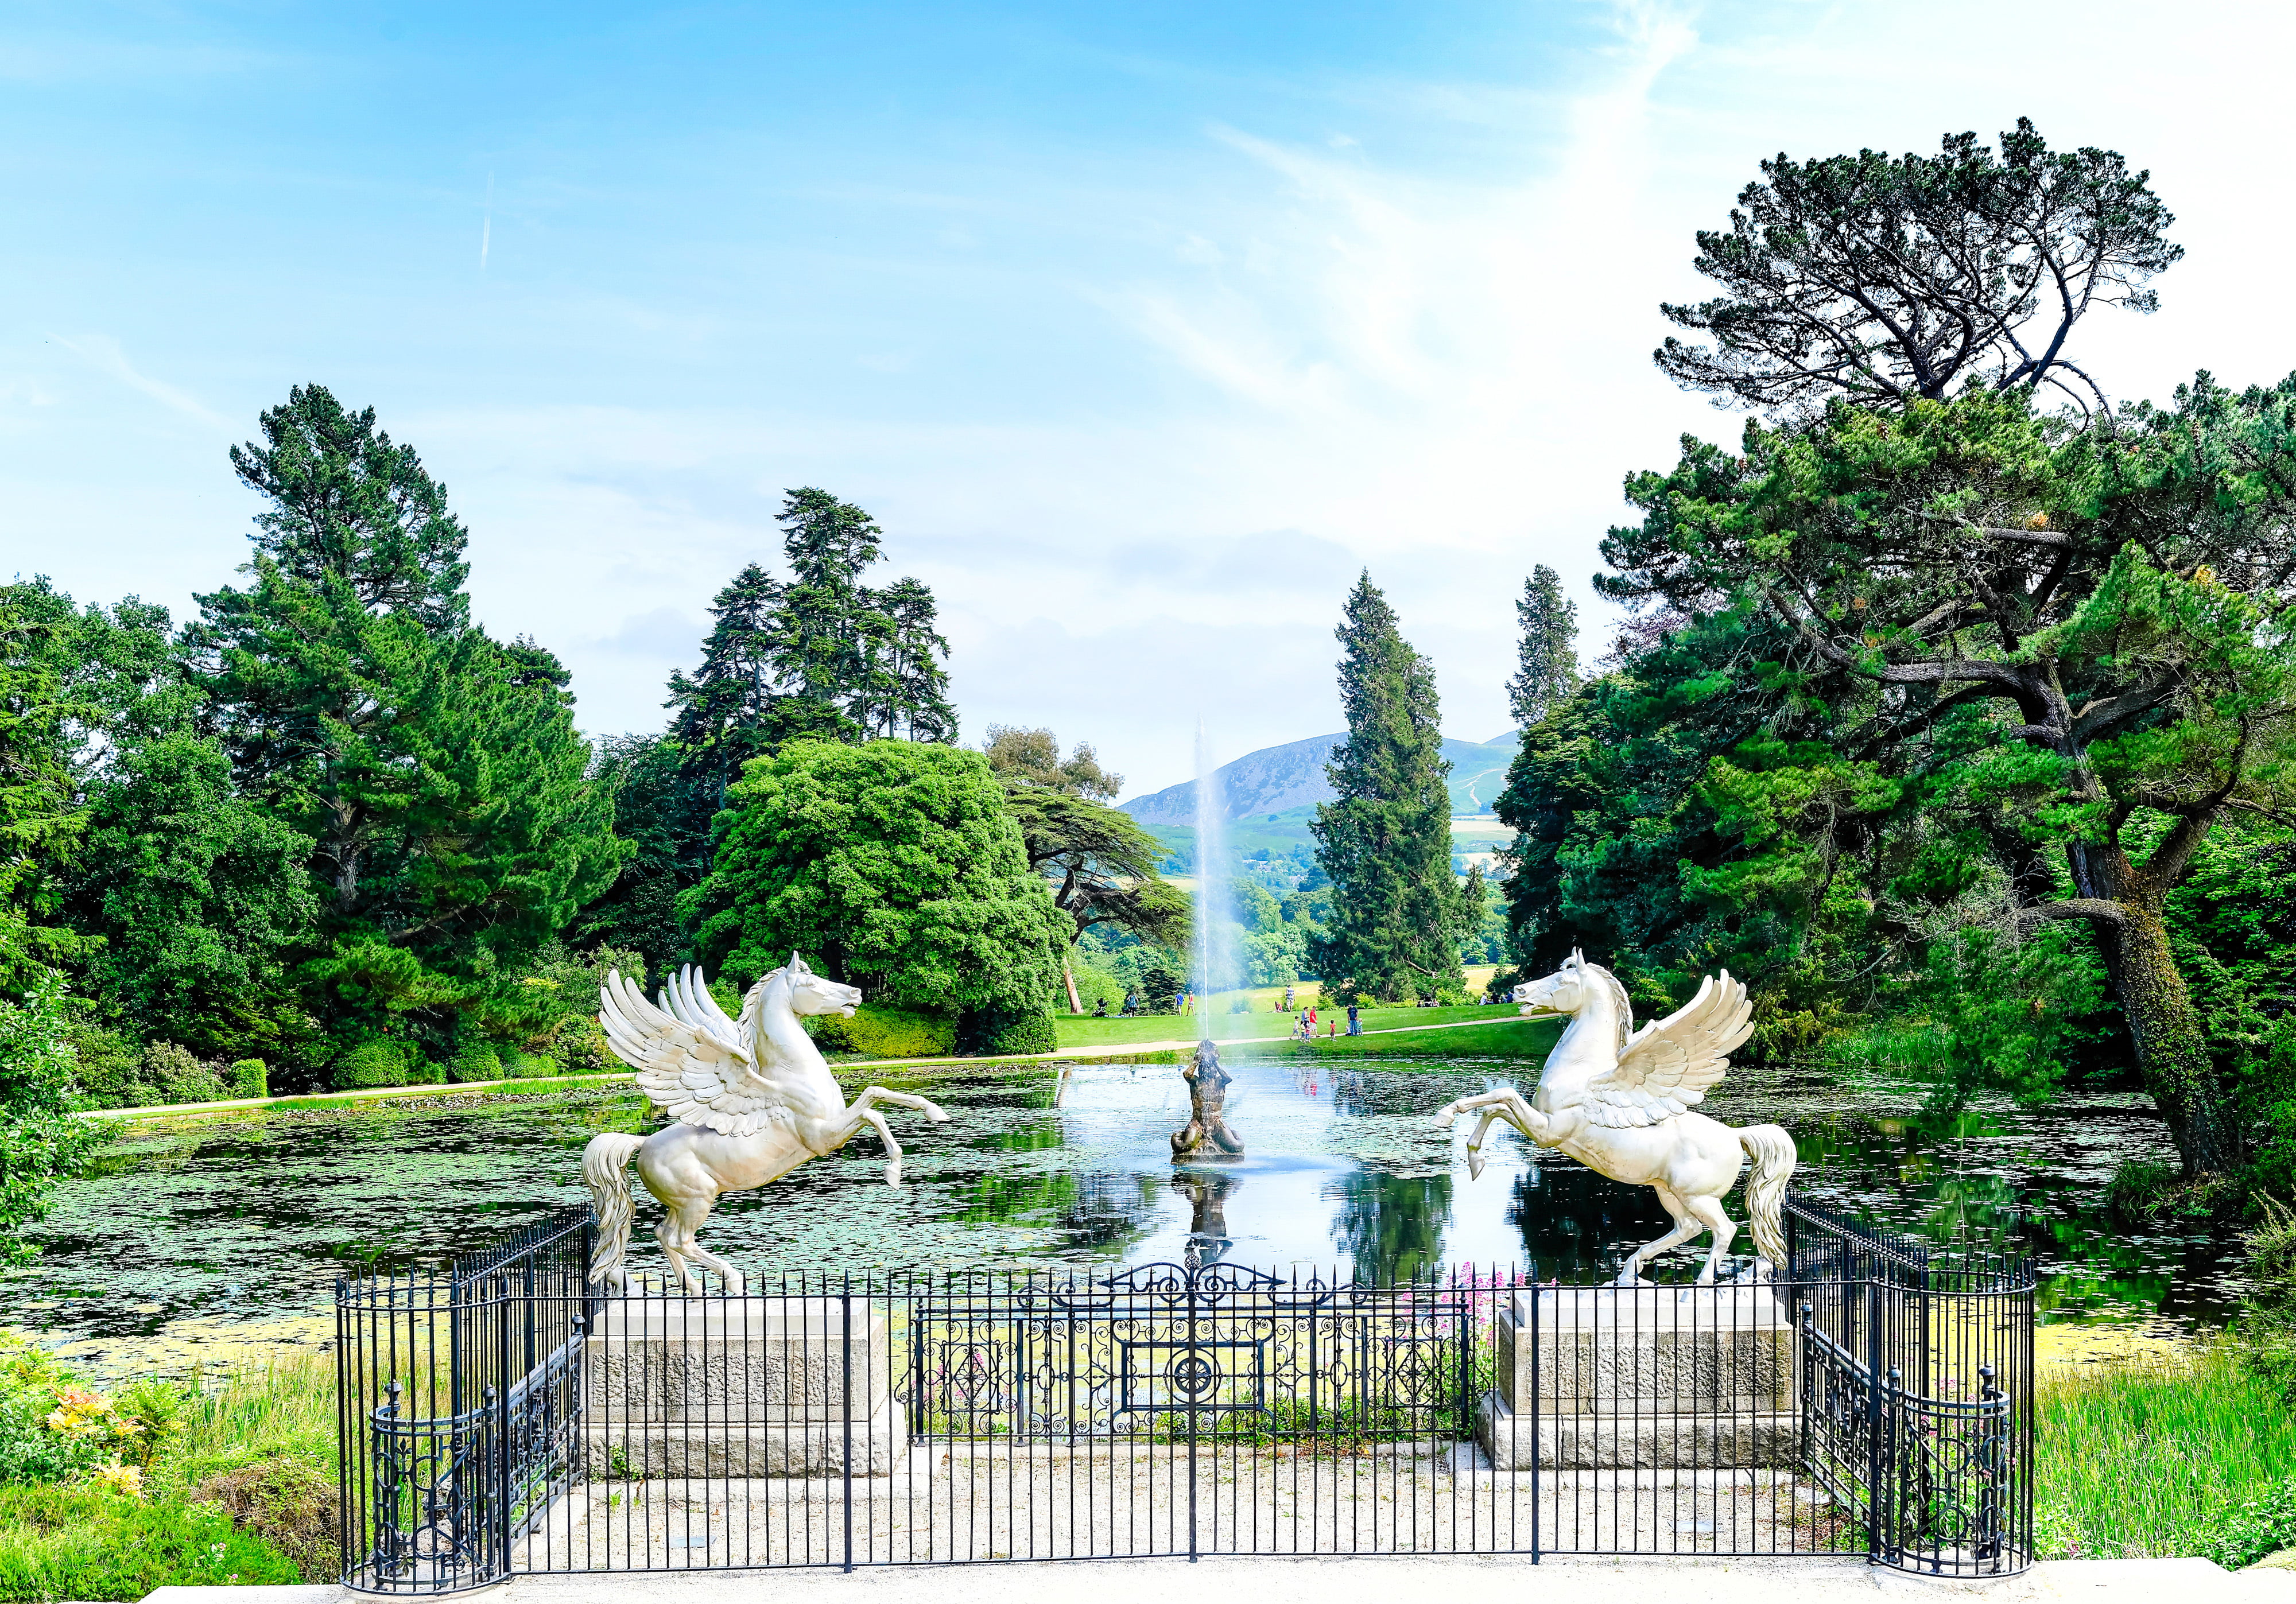 white unicorn statues, the sky, trees, pond, Park, people, horse